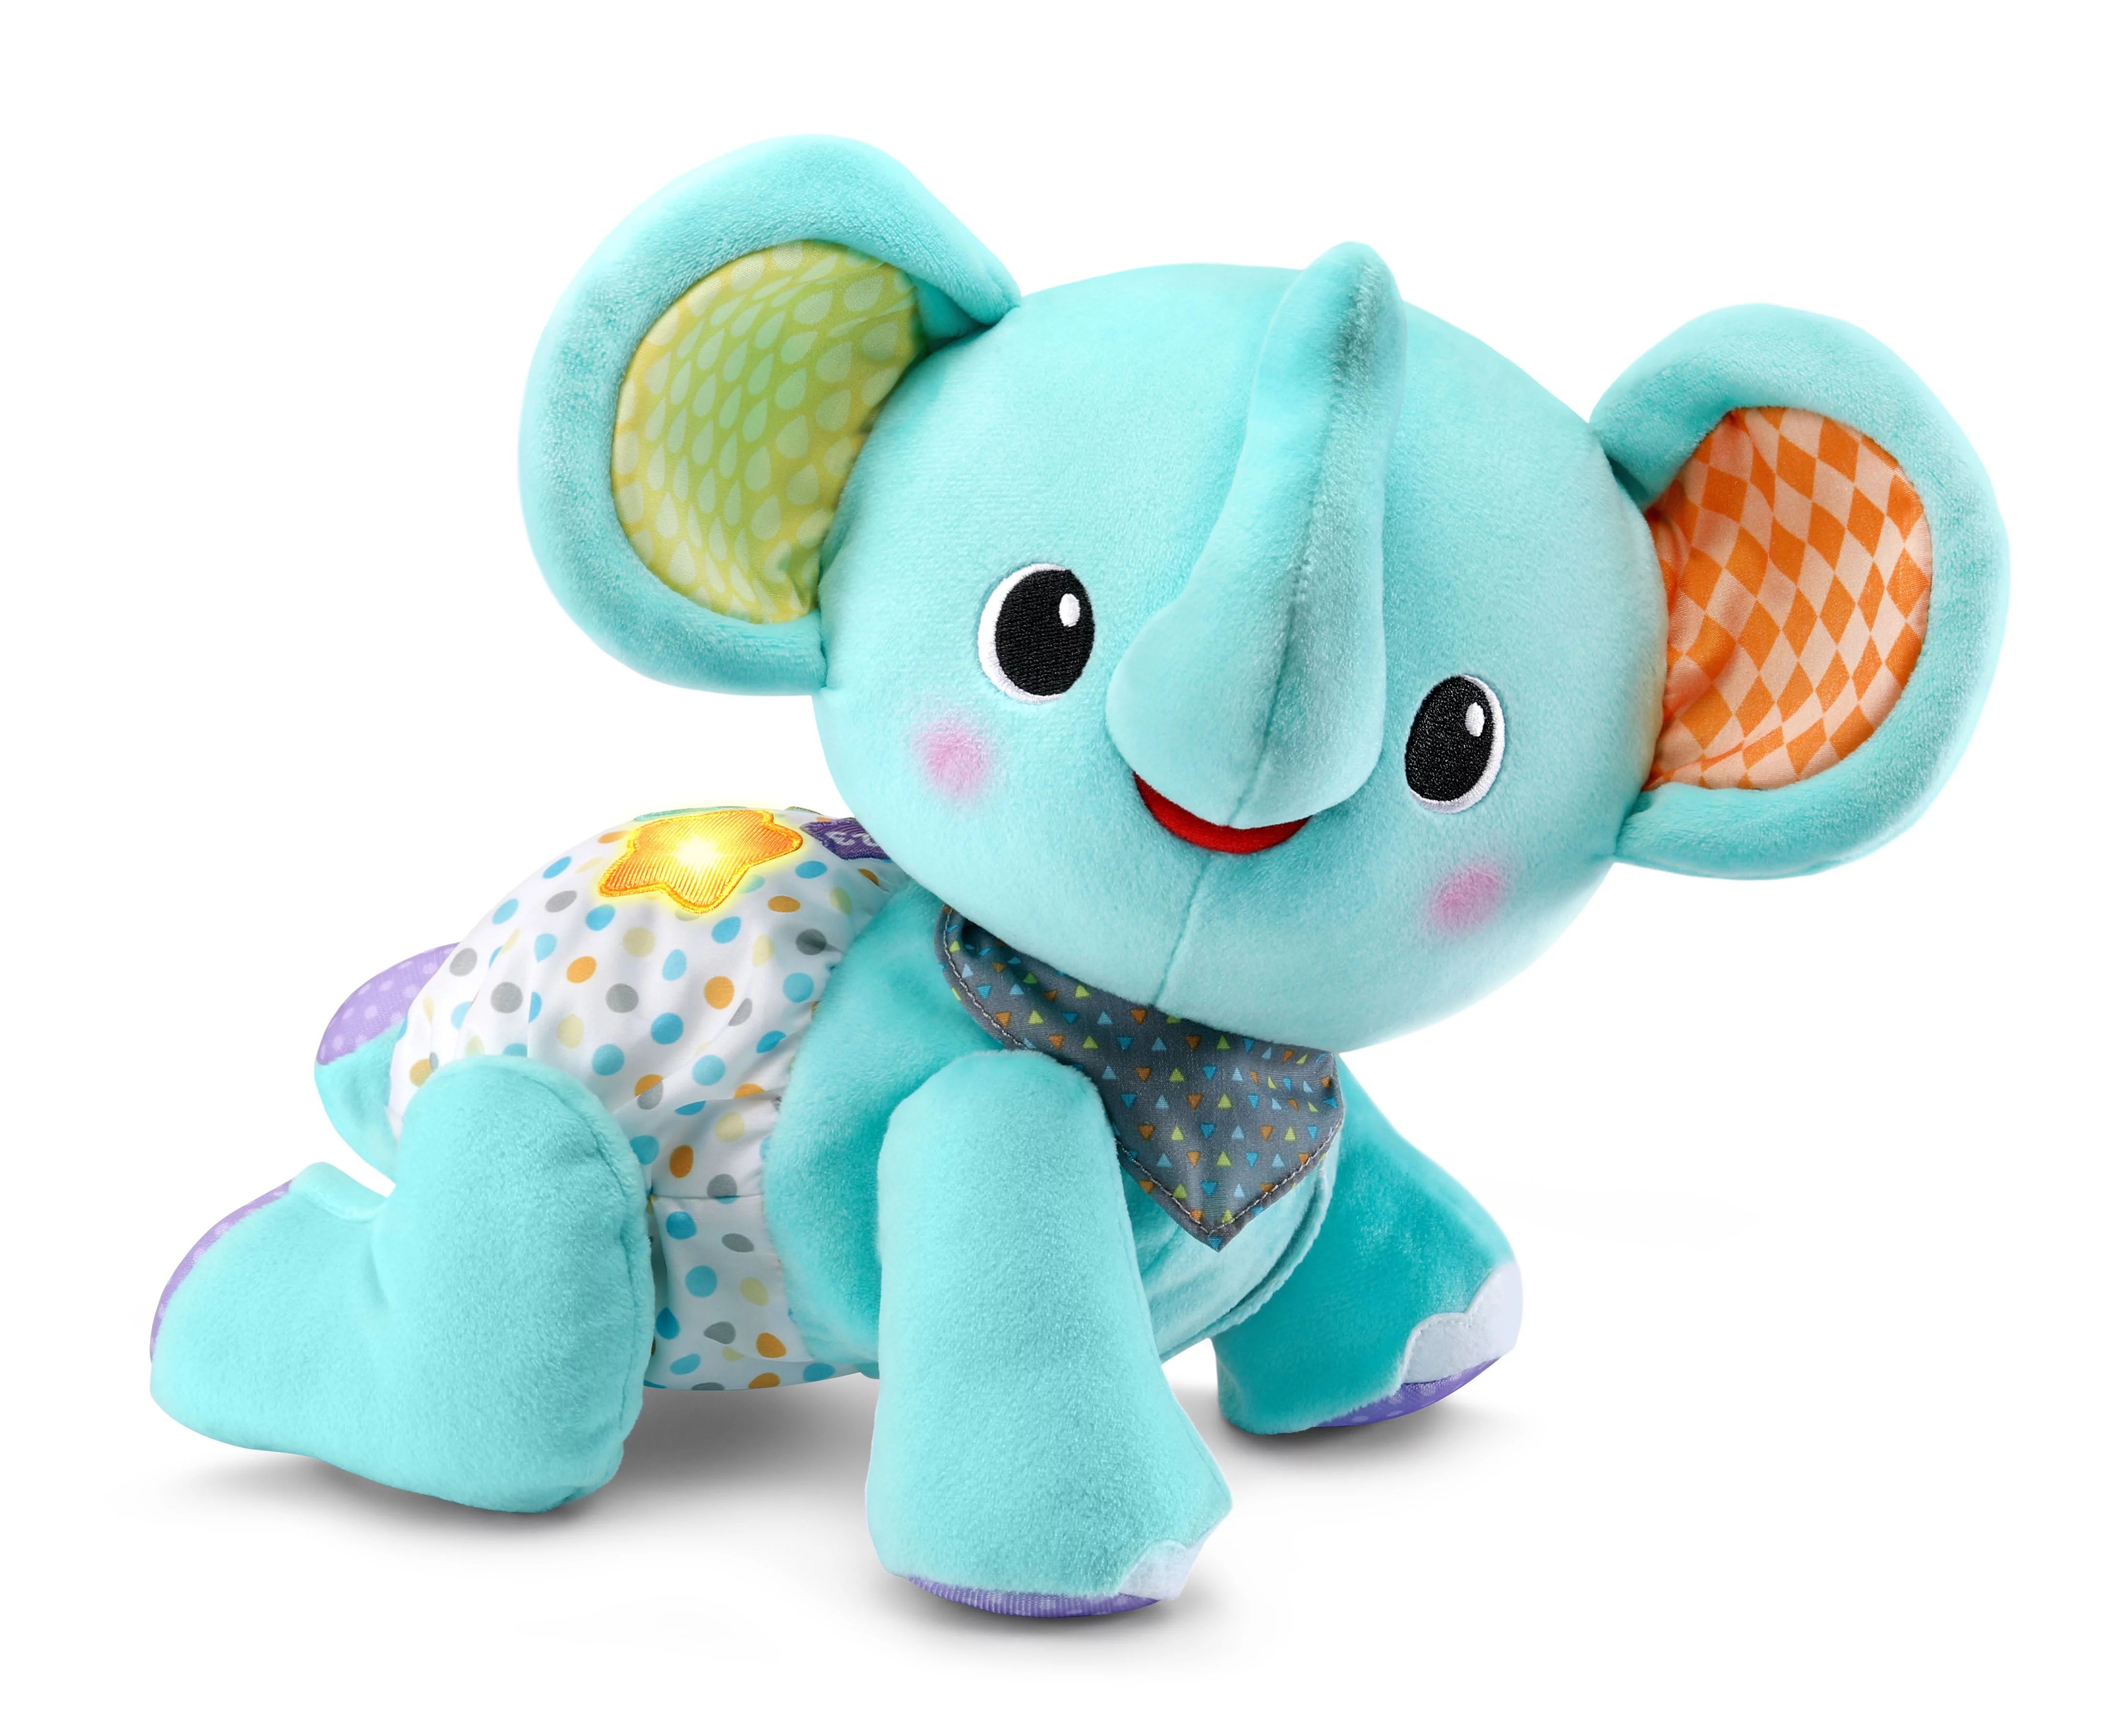 VTech Explore & Crawl Elephant Plush Baby and Toddler Toy, Teal | Walmart (US)